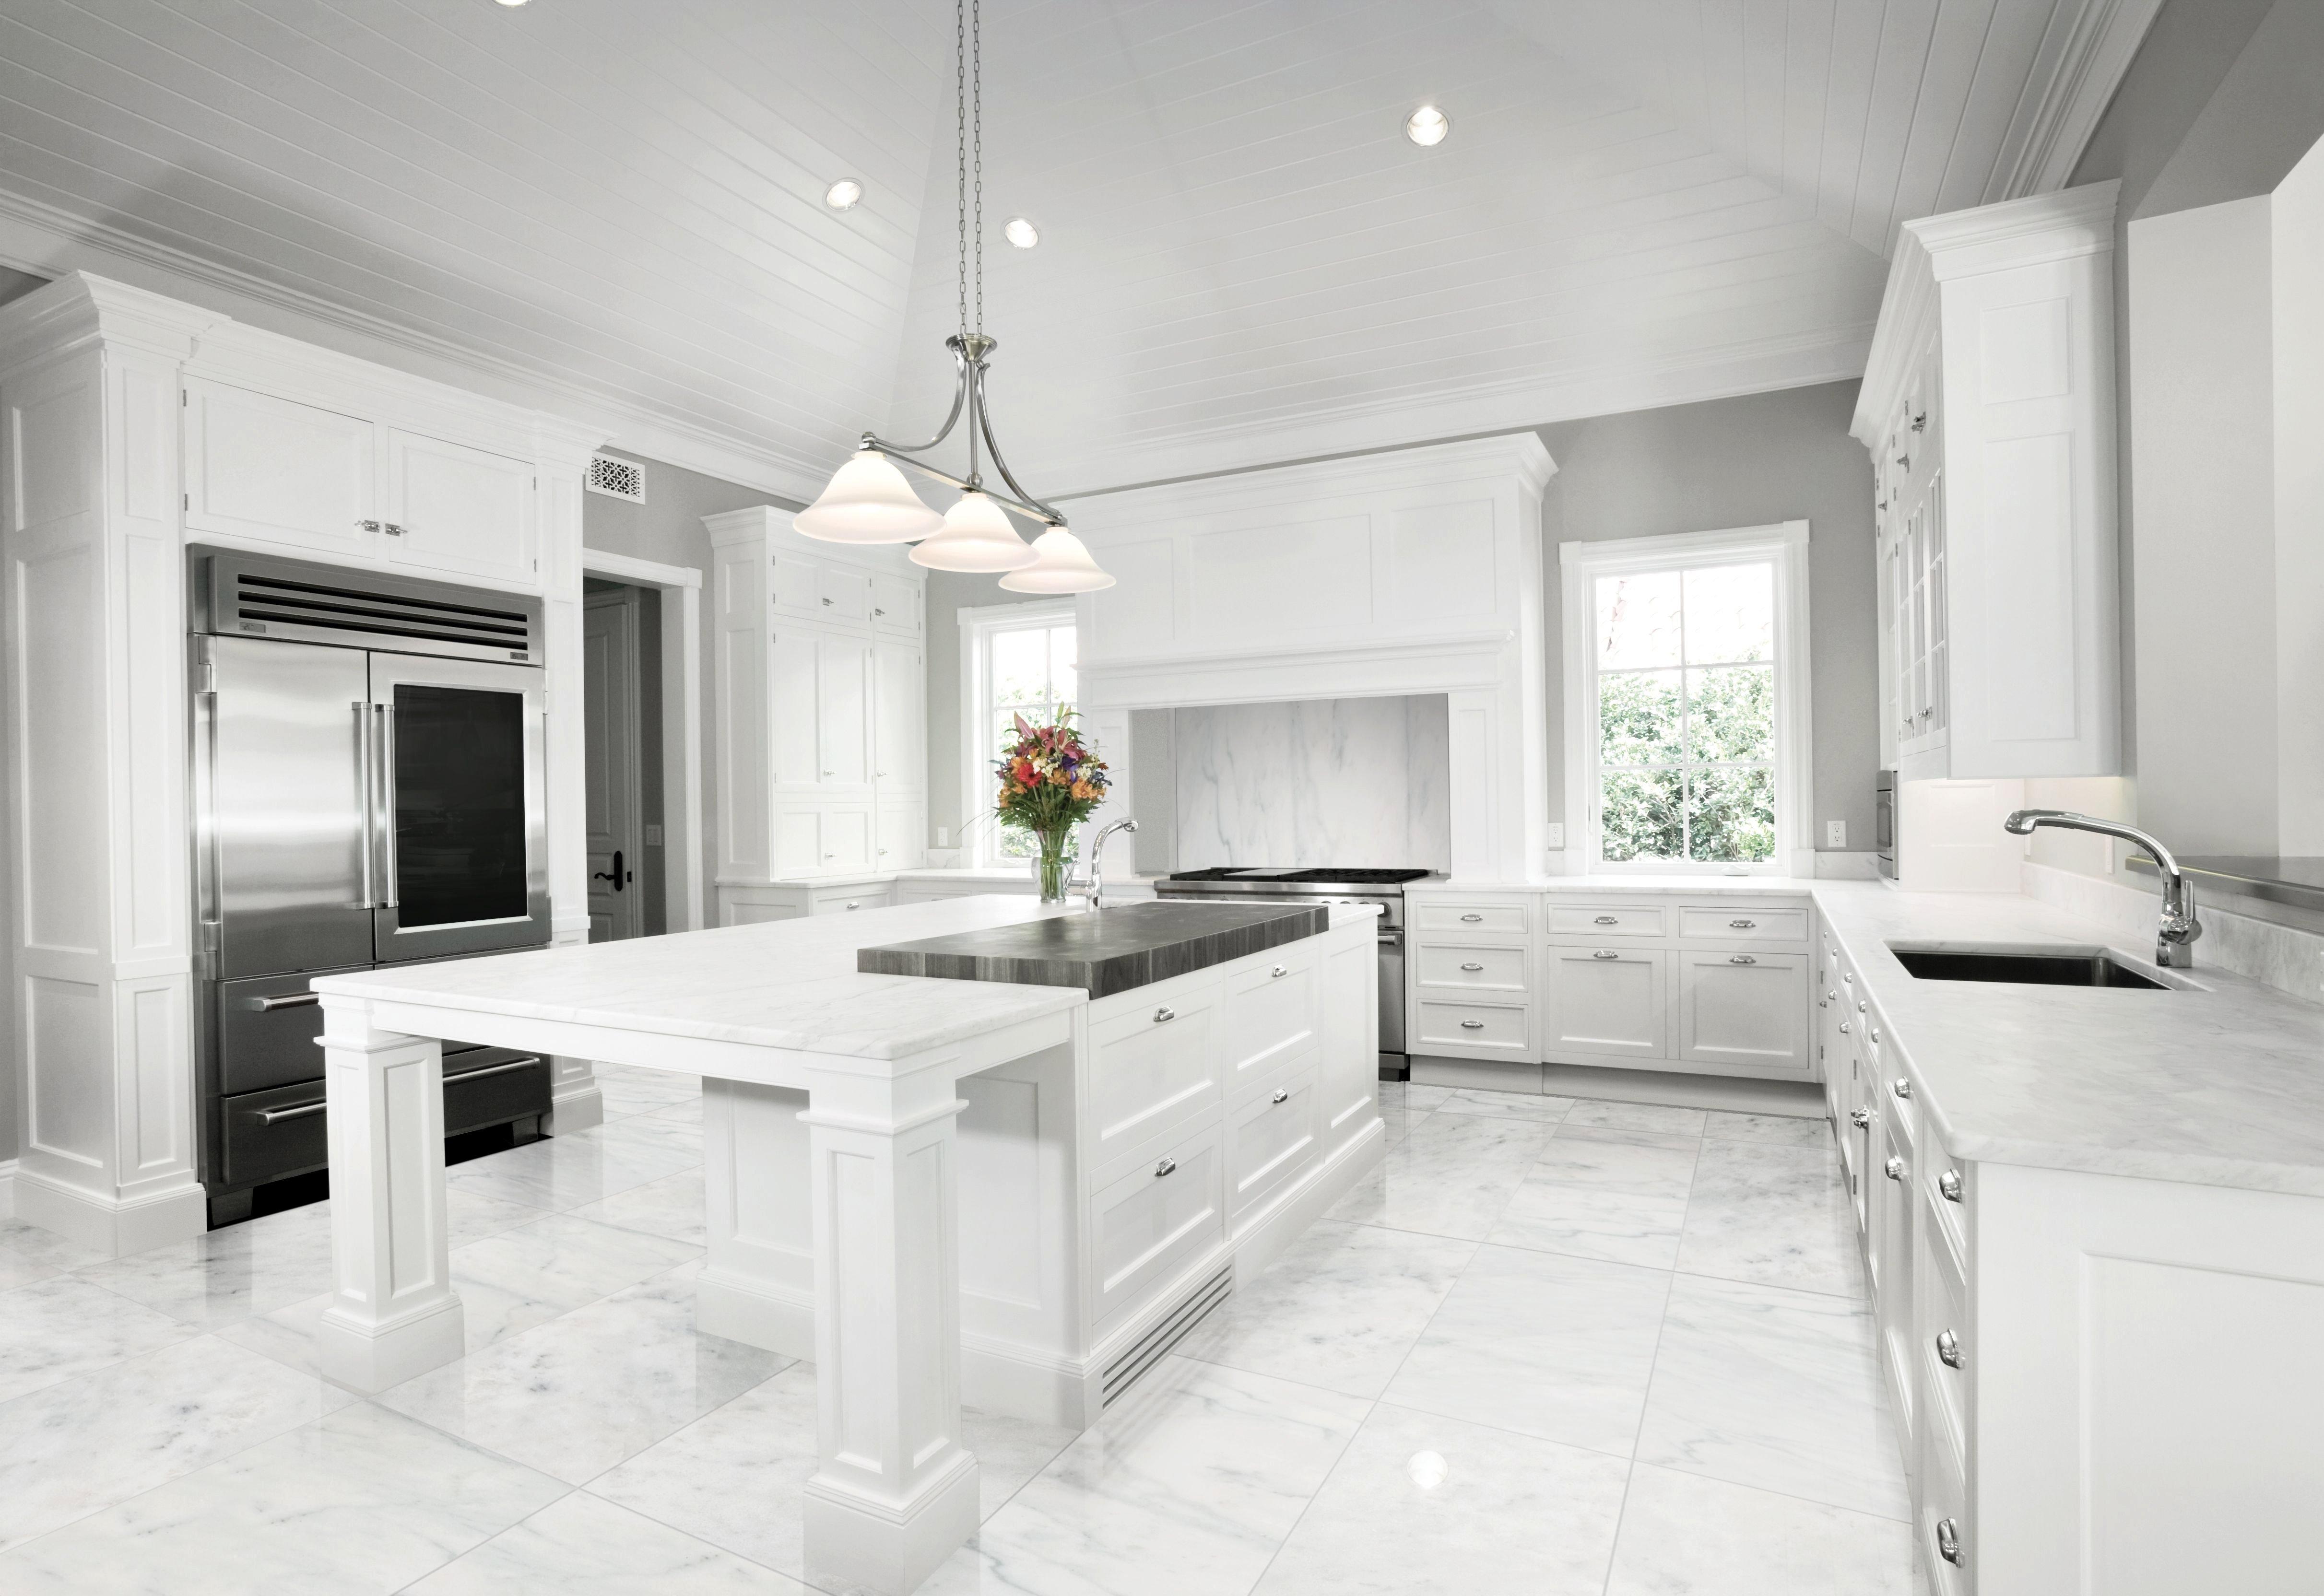 Provincial White Polished Marble Tile